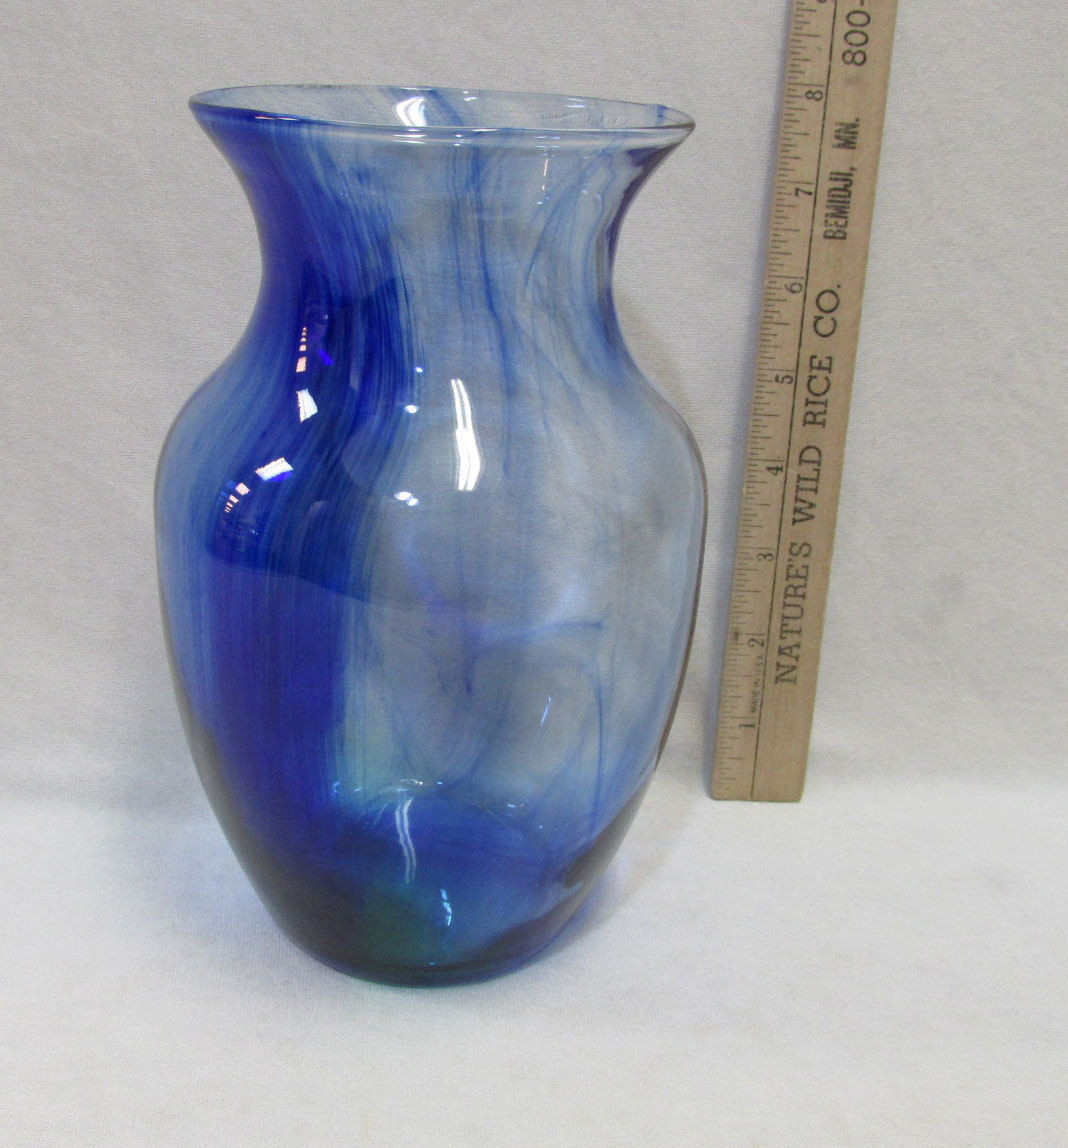 22 Perfect Handblown Glass Vase 2024 free download handblown glass vase of cobalt blue vase hand blown glass floral and similar items pertaining to cobalt blue vase hand blown glass floral flowers swirling swirl clear design